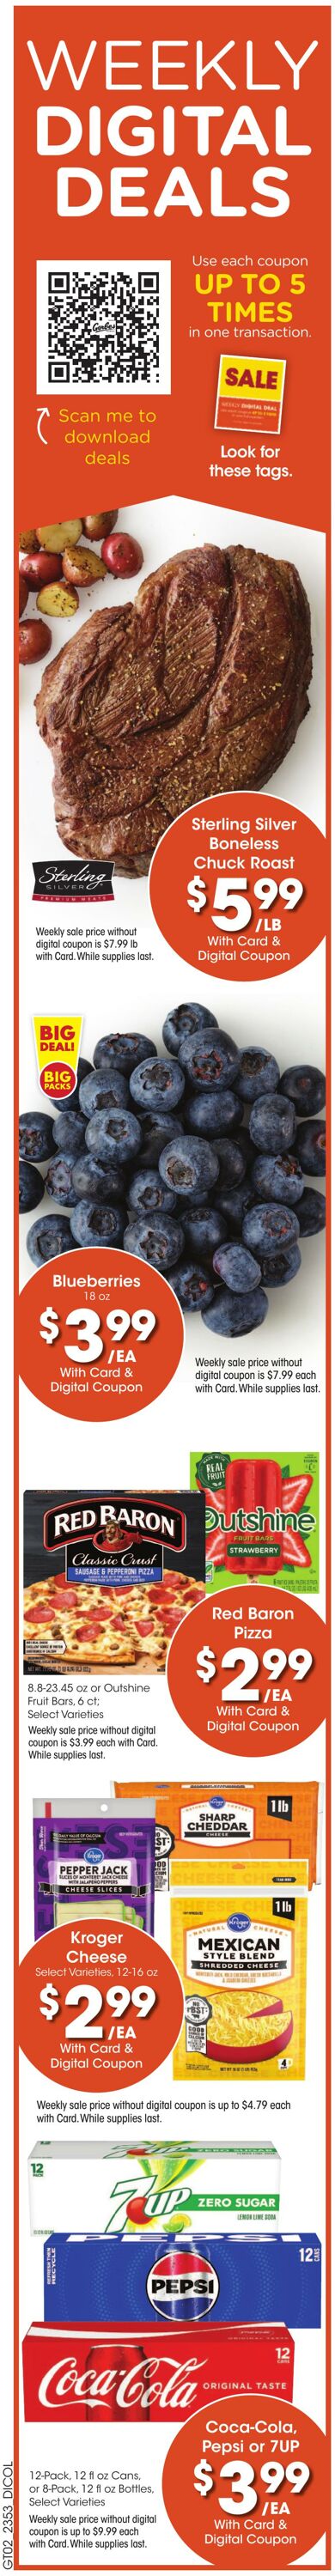 Weekly ad Gerbes Supermarkets 01/31/2024 - 02/06/2024